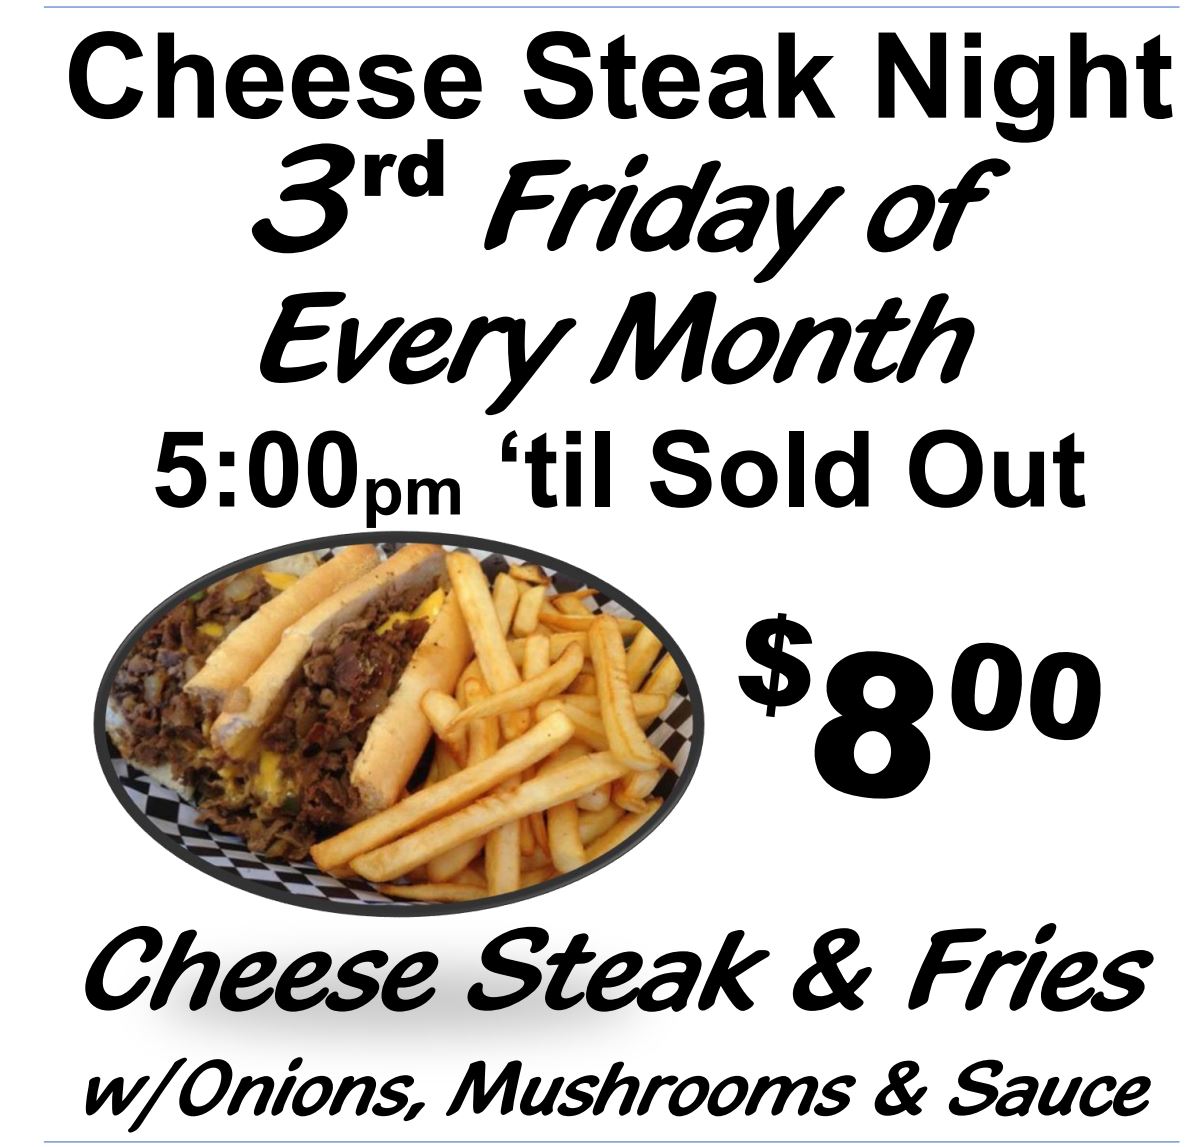 Cheese Steak Night 3rd Friday of Every Month